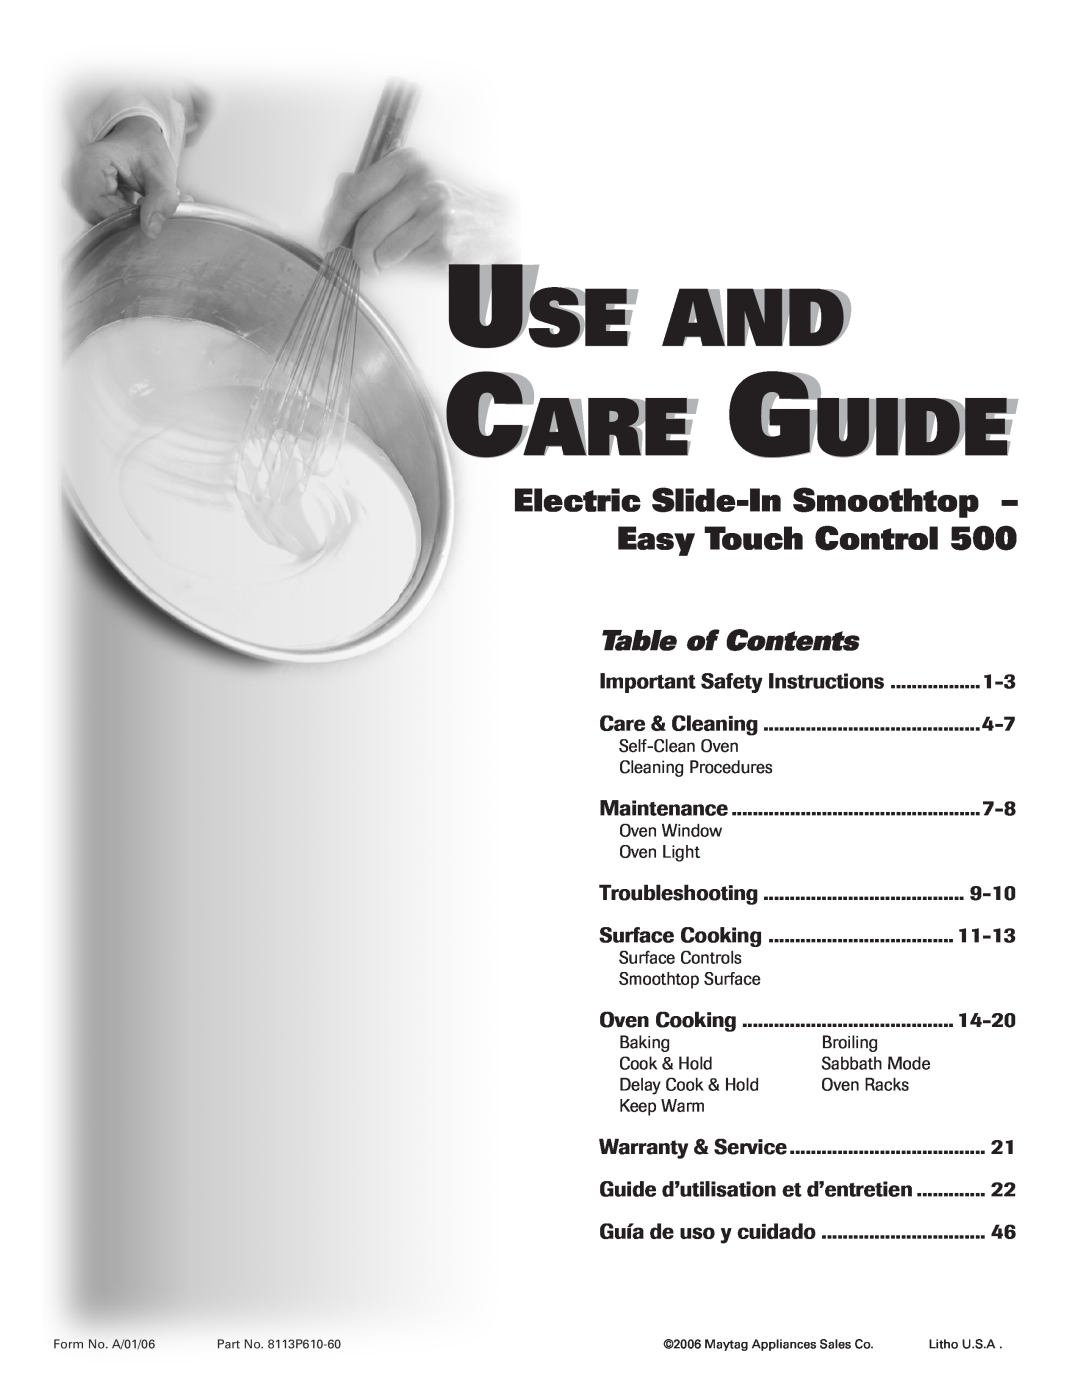 Maytag 500 important safety instructions Use And Care Guide, Electric Slide-InSmoothtop – Easy Touch Control 